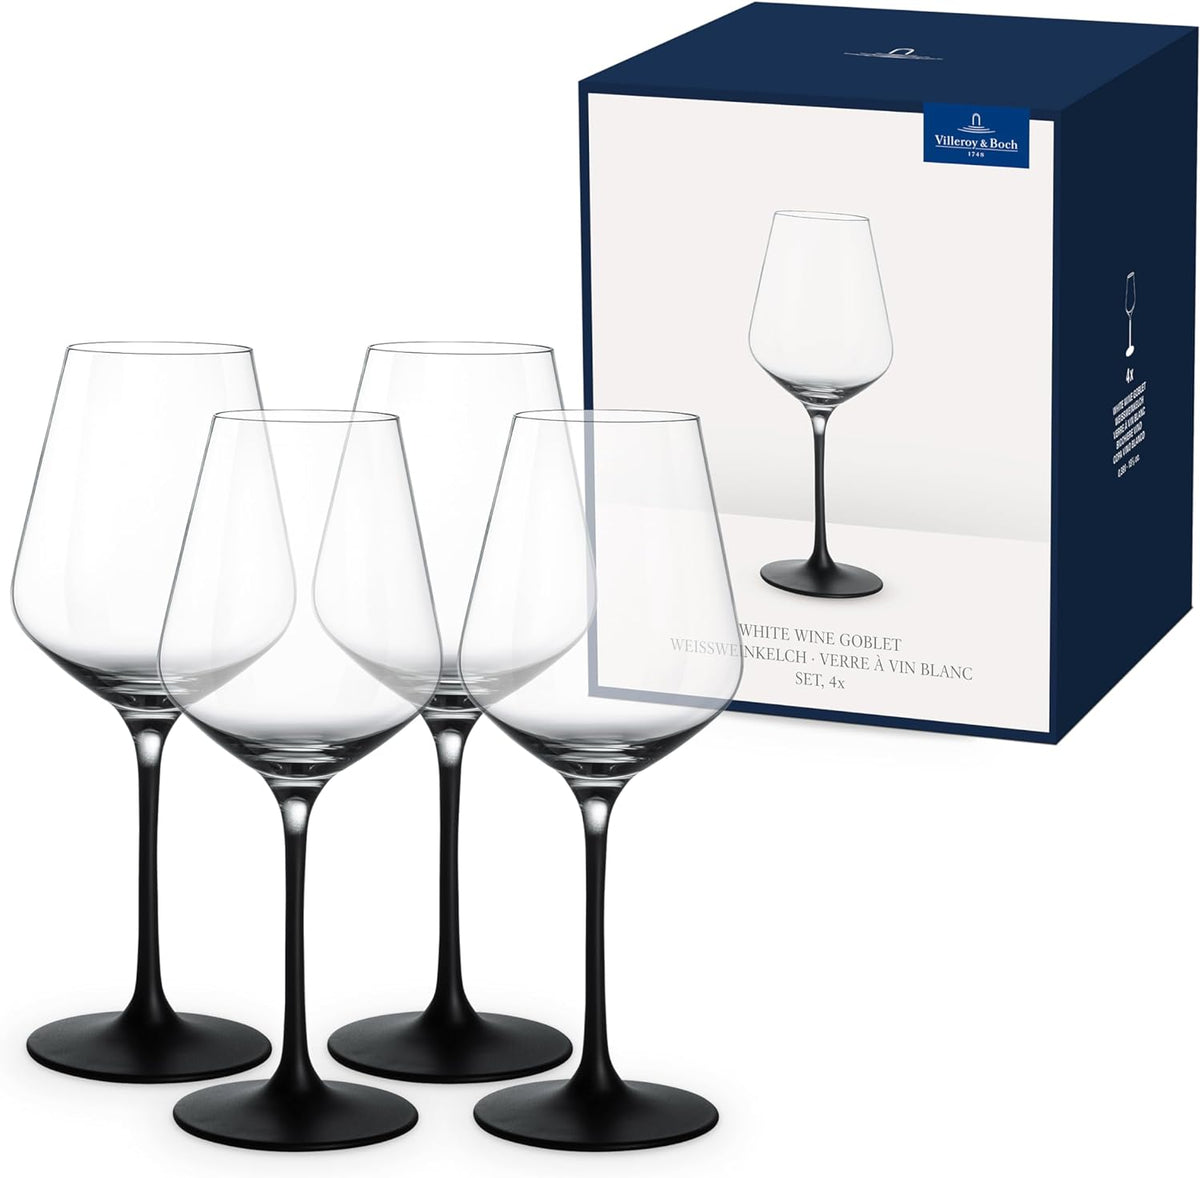 Villeroy & Boch Manufacture Rock Stems White Wine Glass, Set of 4